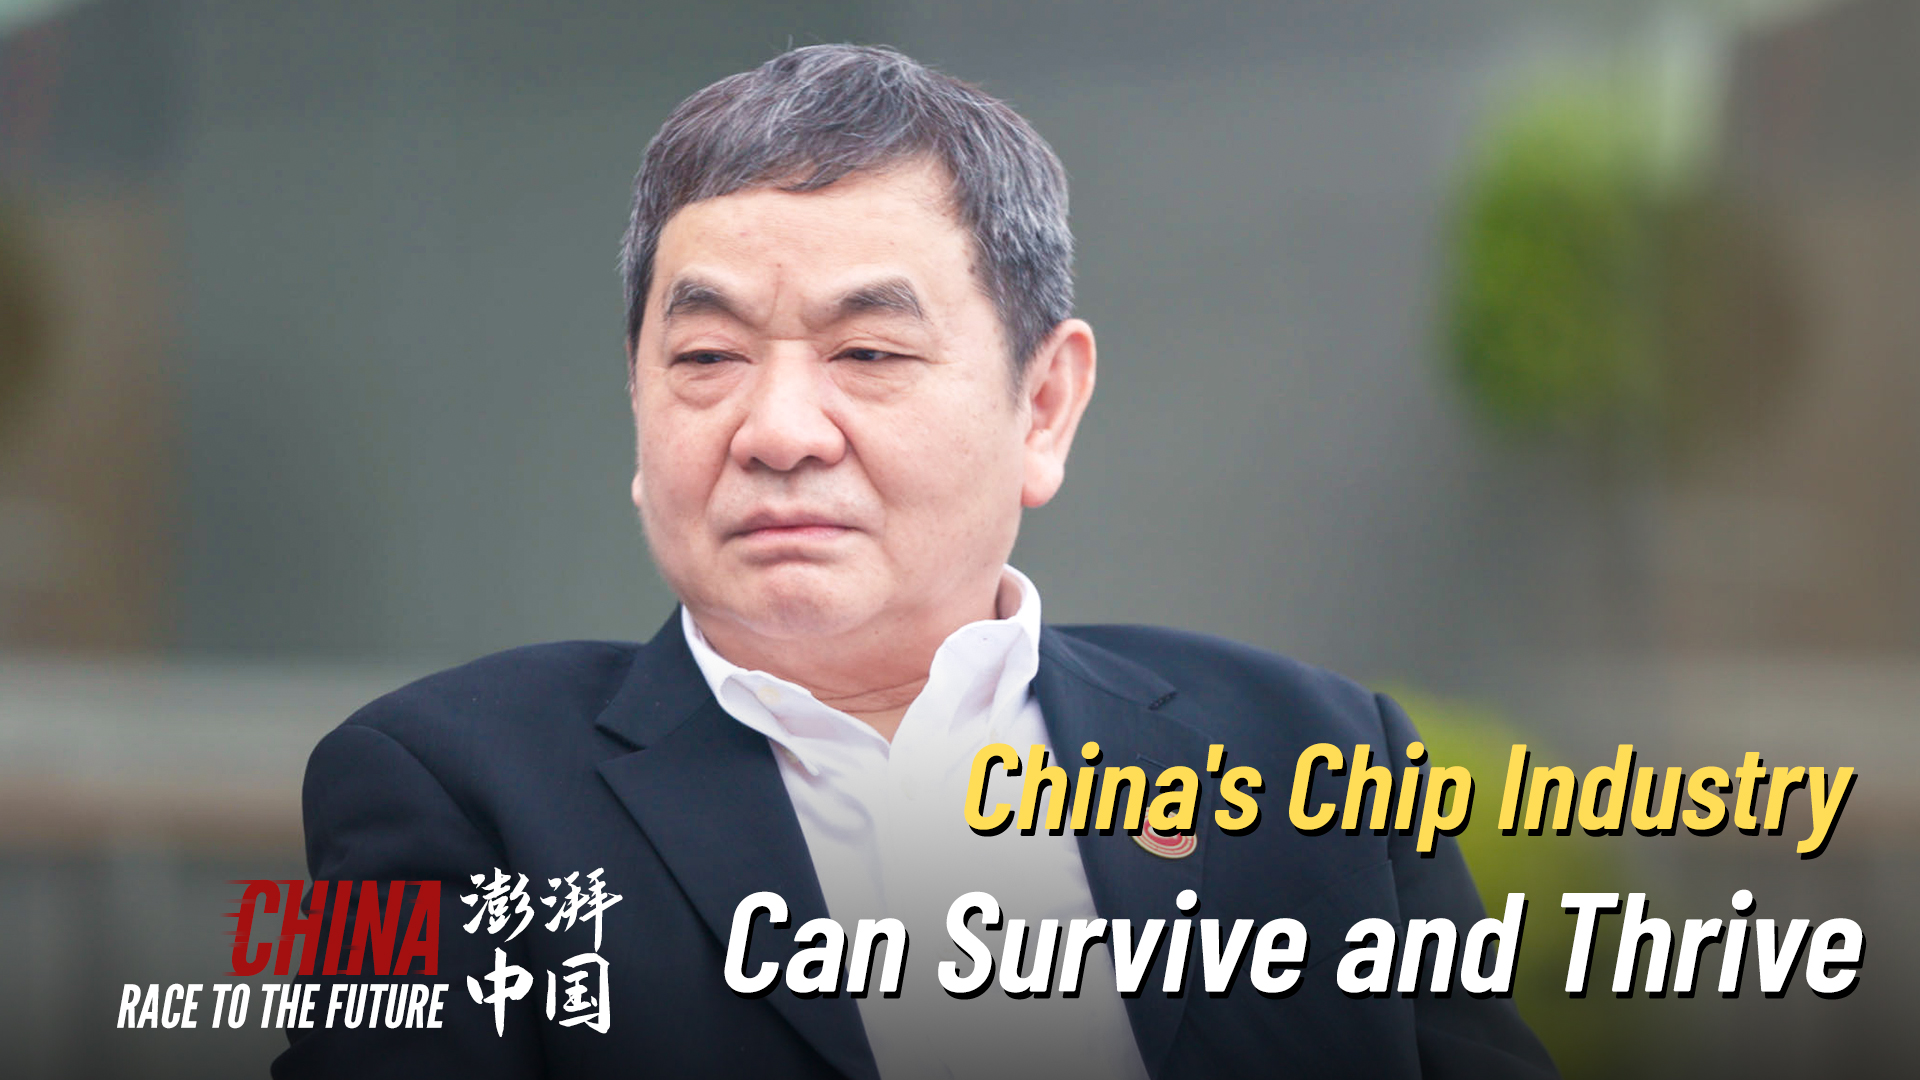 Race to the Future: China's Chip Industry Can Survive and Thrive